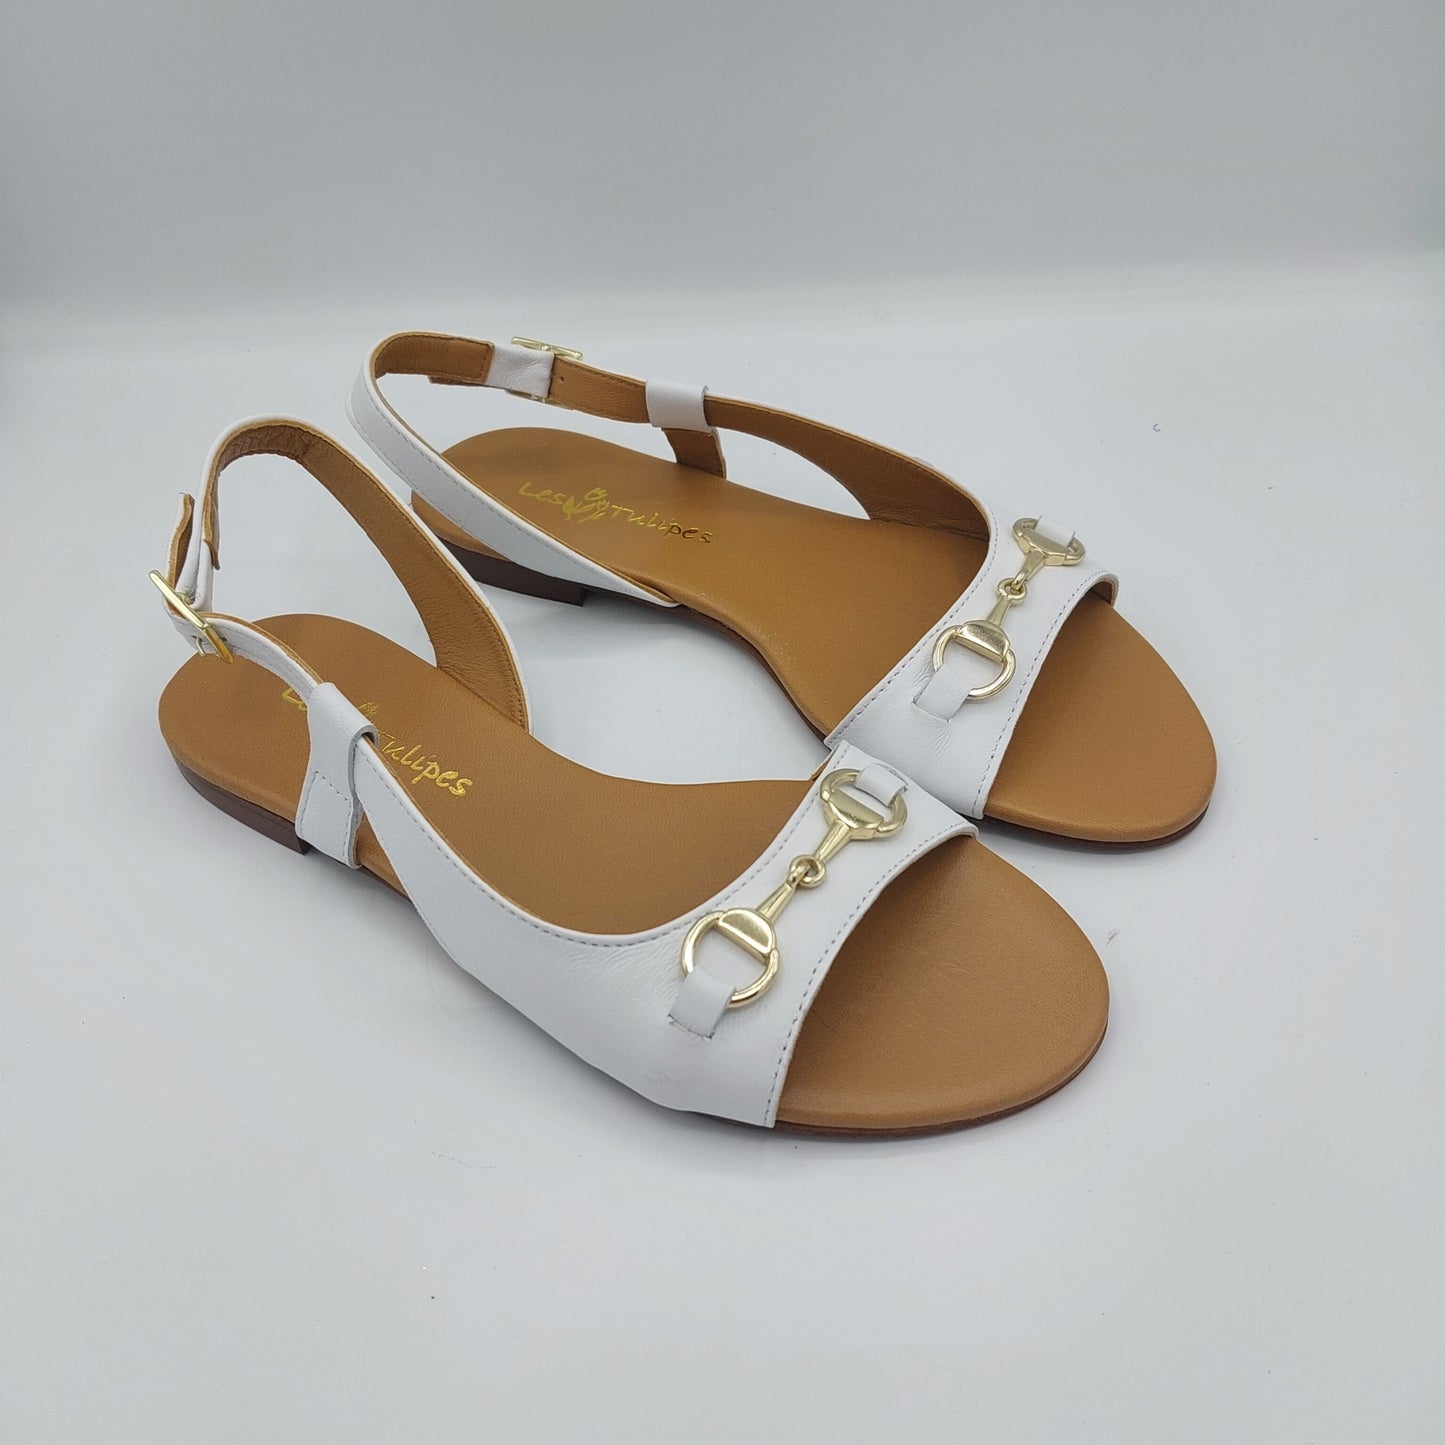 Les Tulupes low cut white leather sandal